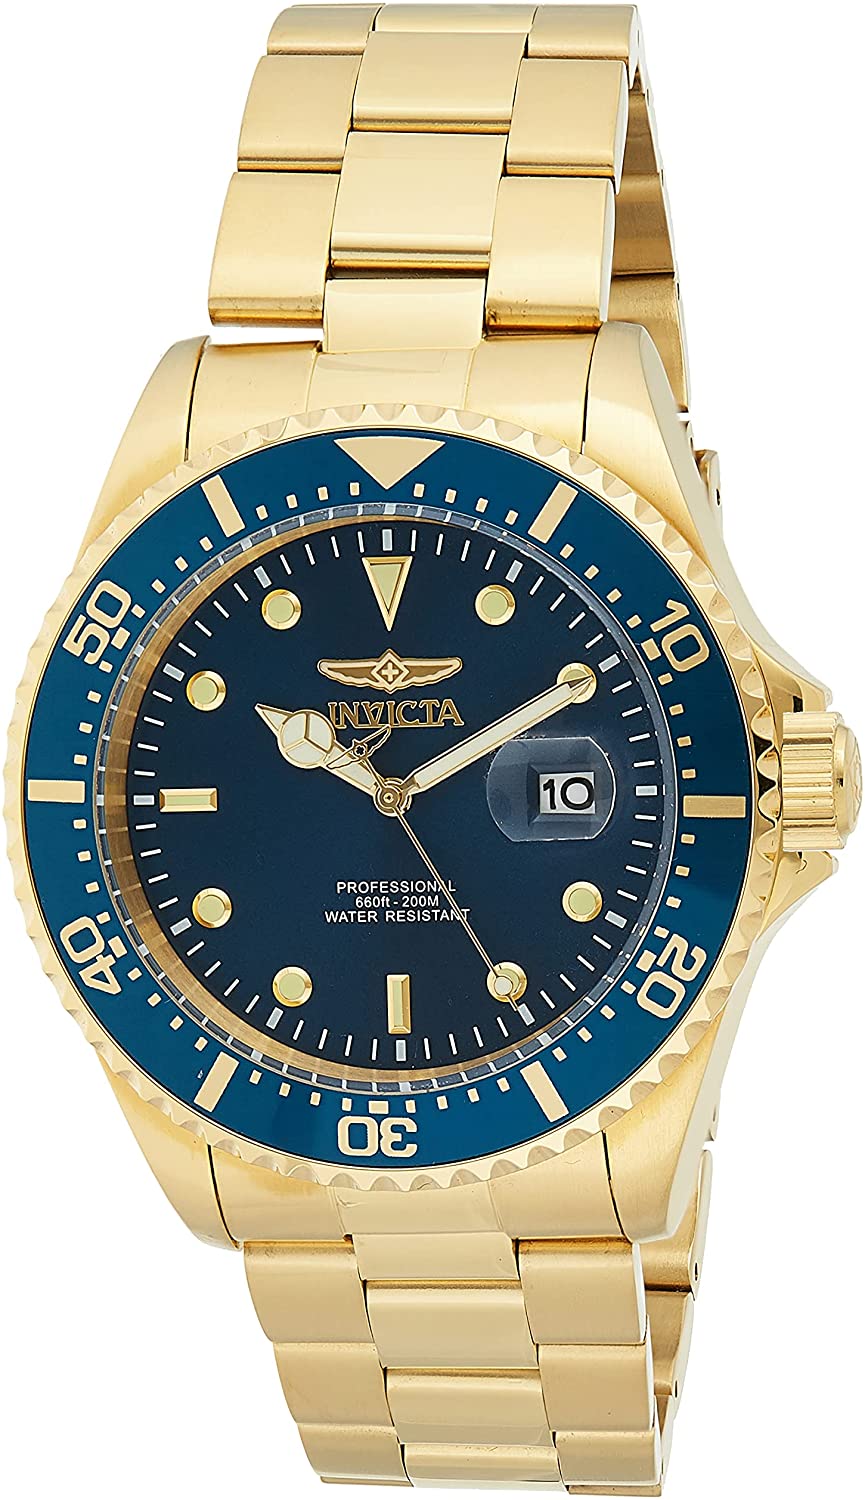 Invicta Men's Pro Diver Quartz Diving Watch with Stainless-Steel Strap, Gold, 22 (Model: 23388) - 3alababak